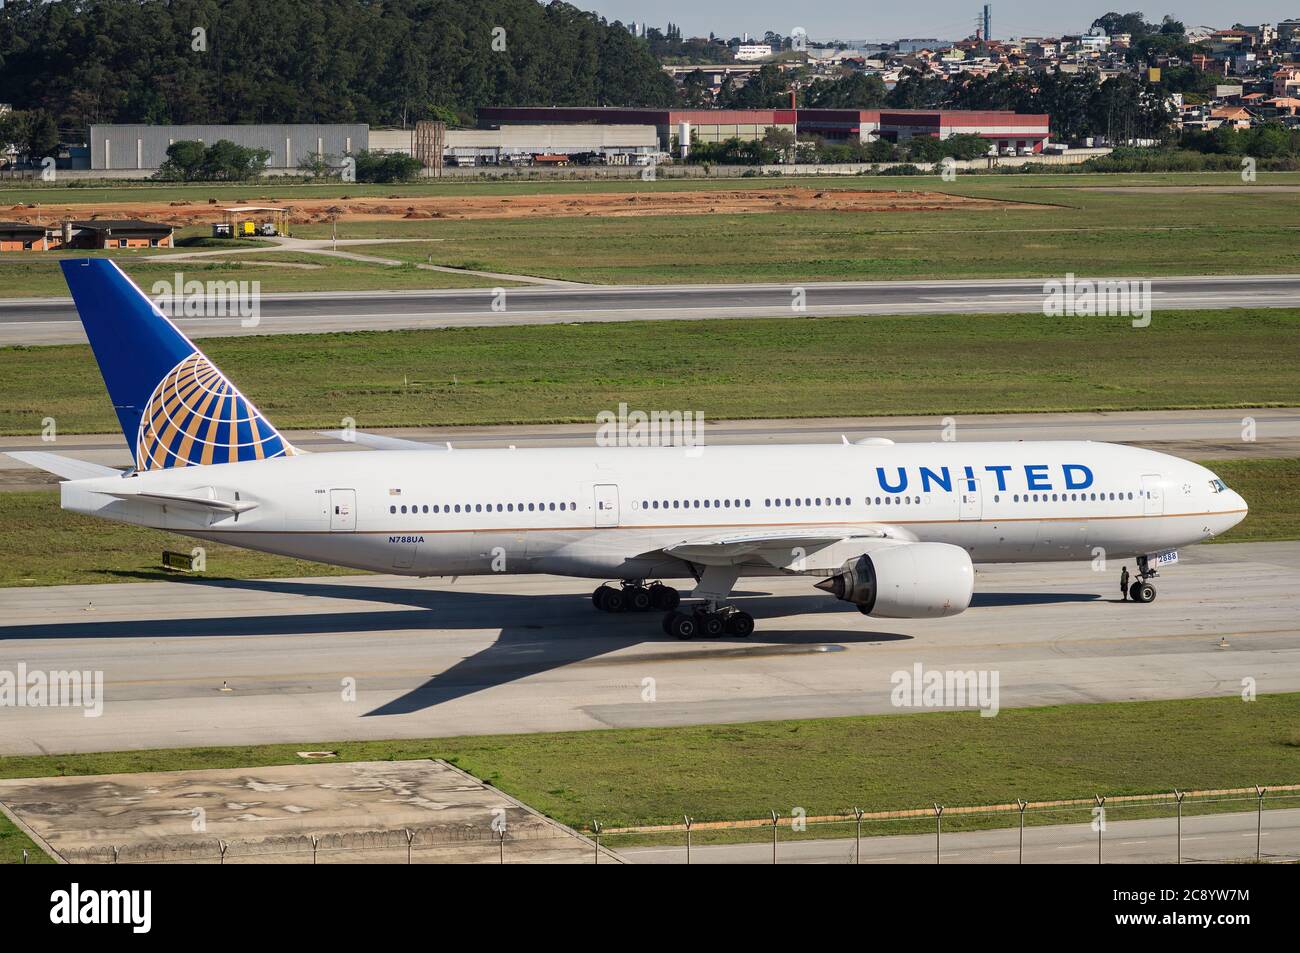 United Airlines Boeing 777-222ER (Reg N788UA) on final checks before depart while on one of the taxiways of Sao Paulo/Guarulhos International Airport. Stock Photo